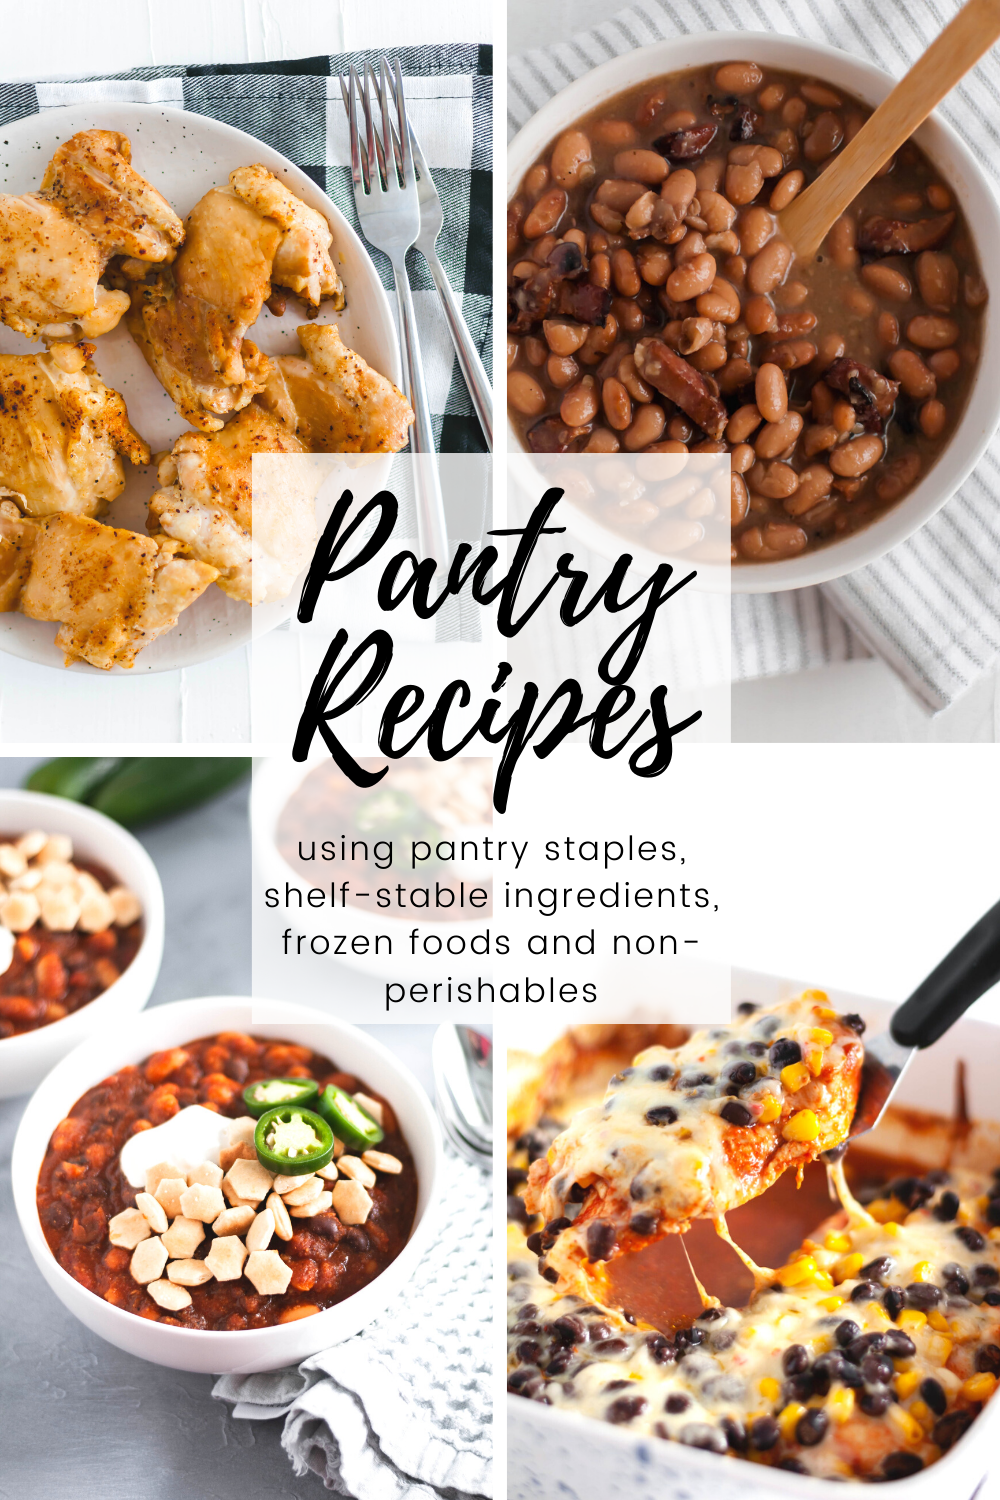 Times are weird right now. With social distancing and quarentine at the forefront of our minds I've compiled a list of simple pantry recipes using staple ingredients. Keep reading for recipes that feature dry goods, non perishables and frozen foods that are commonly in your home. Any possible substitutions will be included as well.